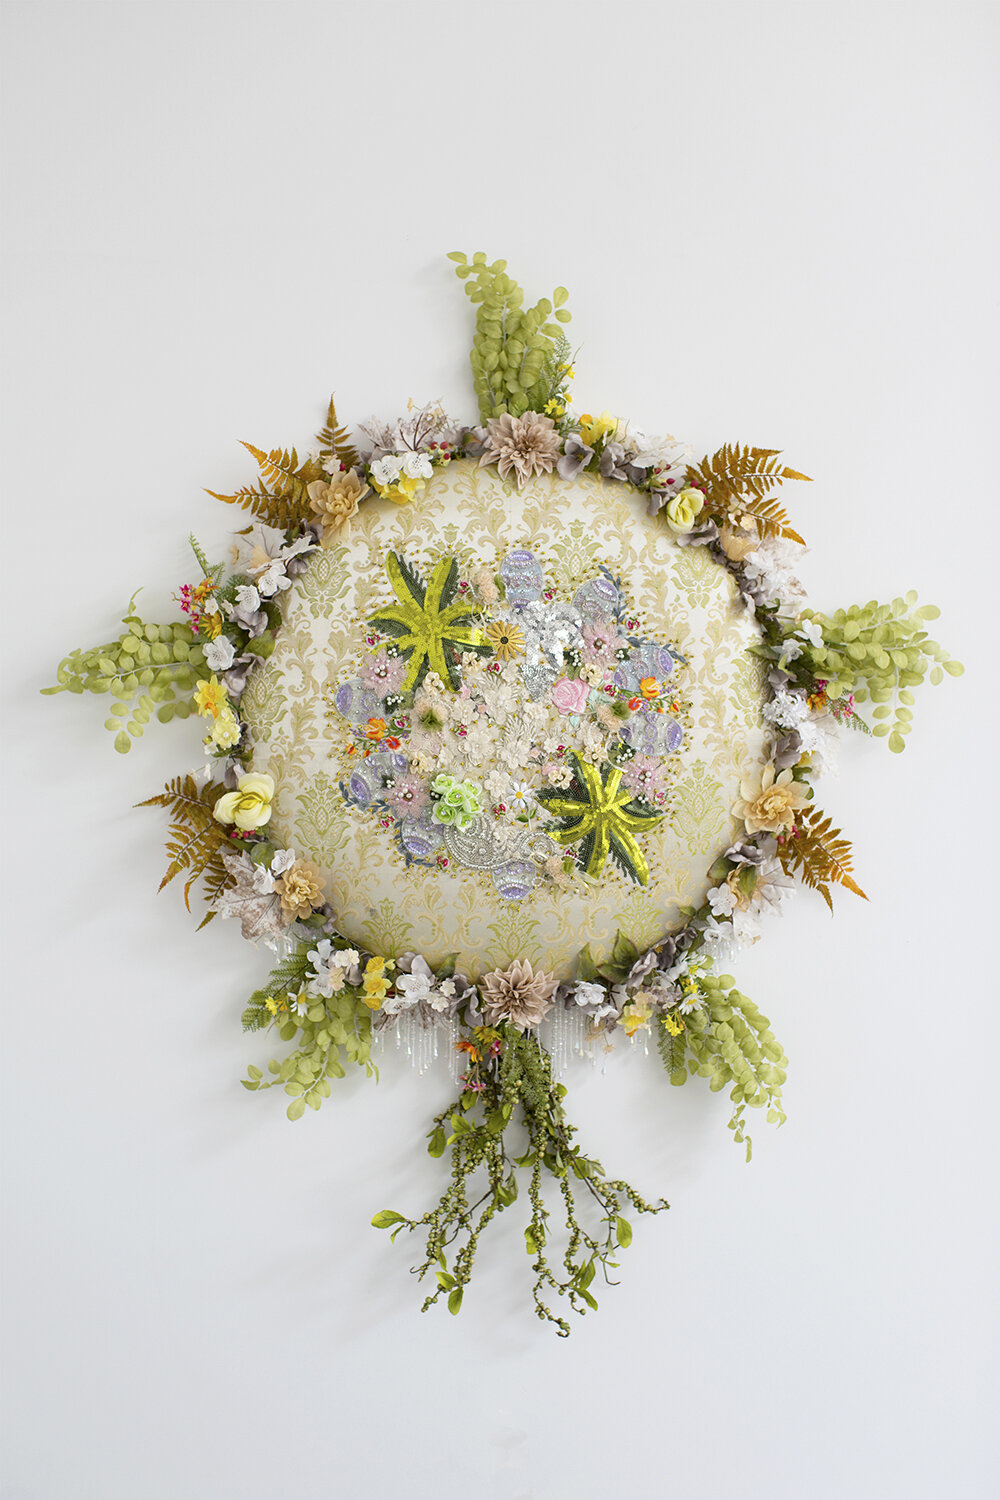   Elegy #11 , 2019, Crystal and plastic beads, sequin patches, found fabric, trim, fabric flowers, magnets, polyester batting, Baltic birch plywood, thread, 55 x 40 x 5” 